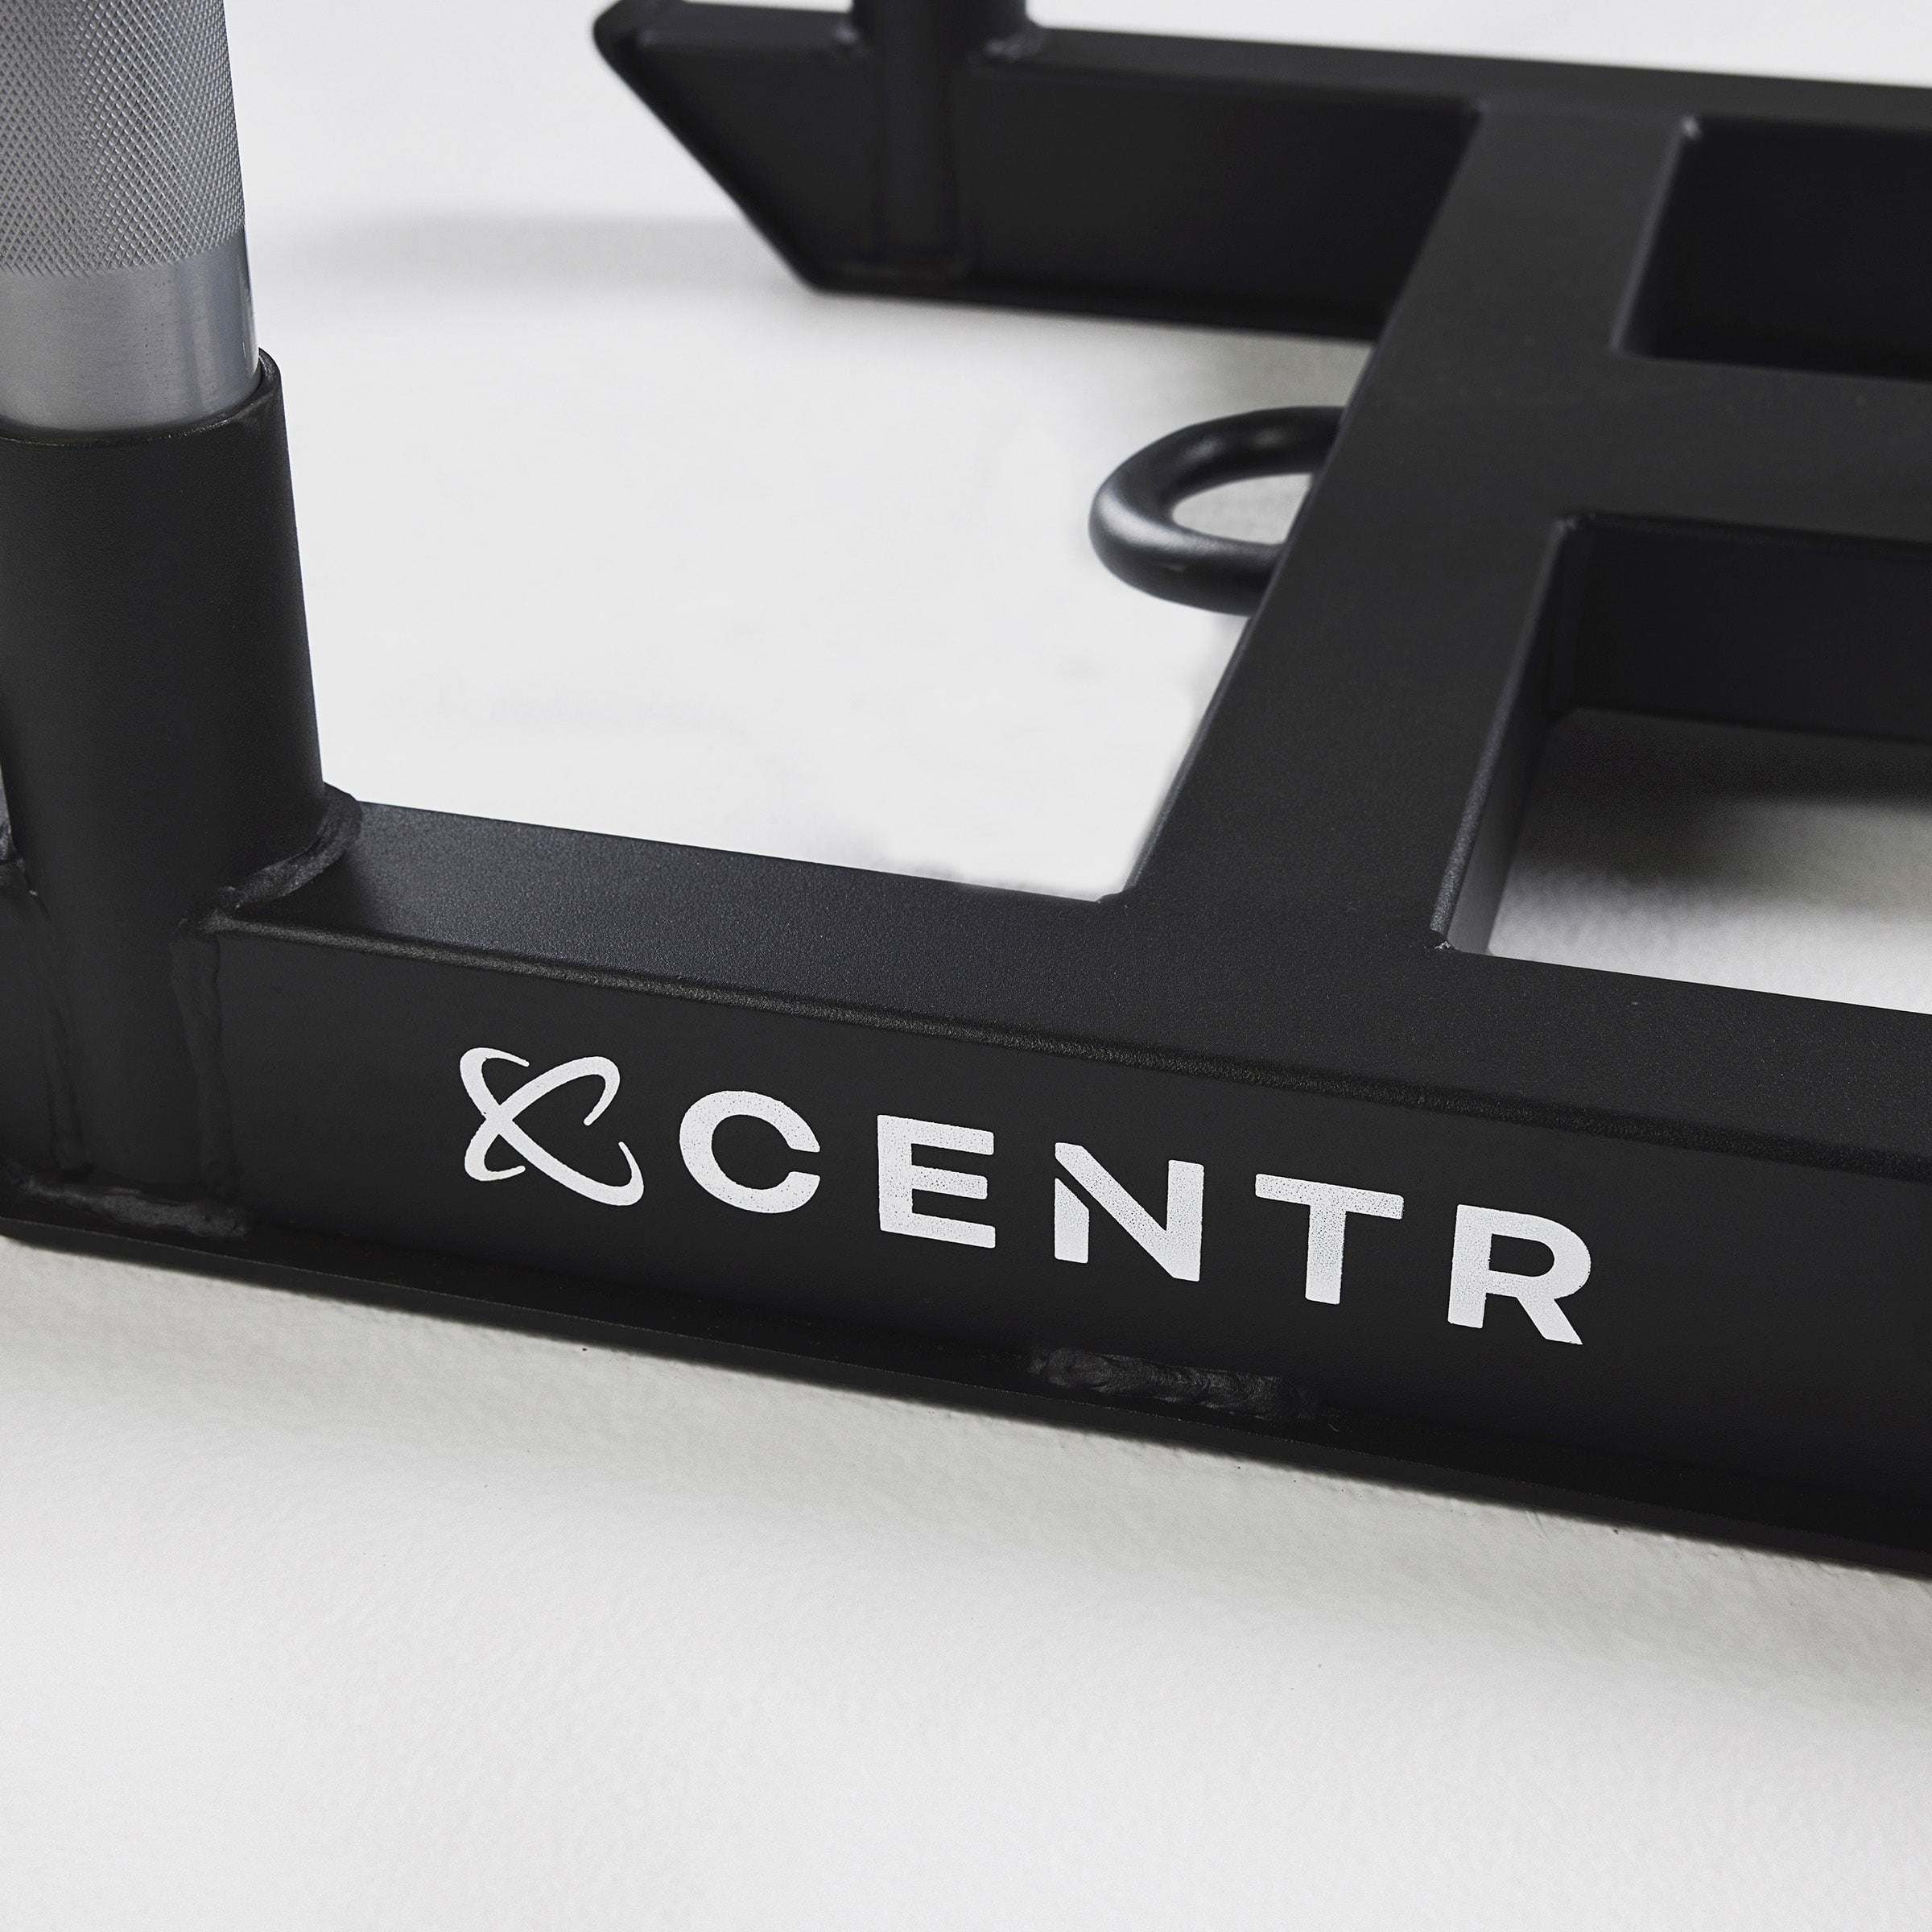 CENTR x HYROX Competition Power Sled (SHIPPING EARLY MAY)